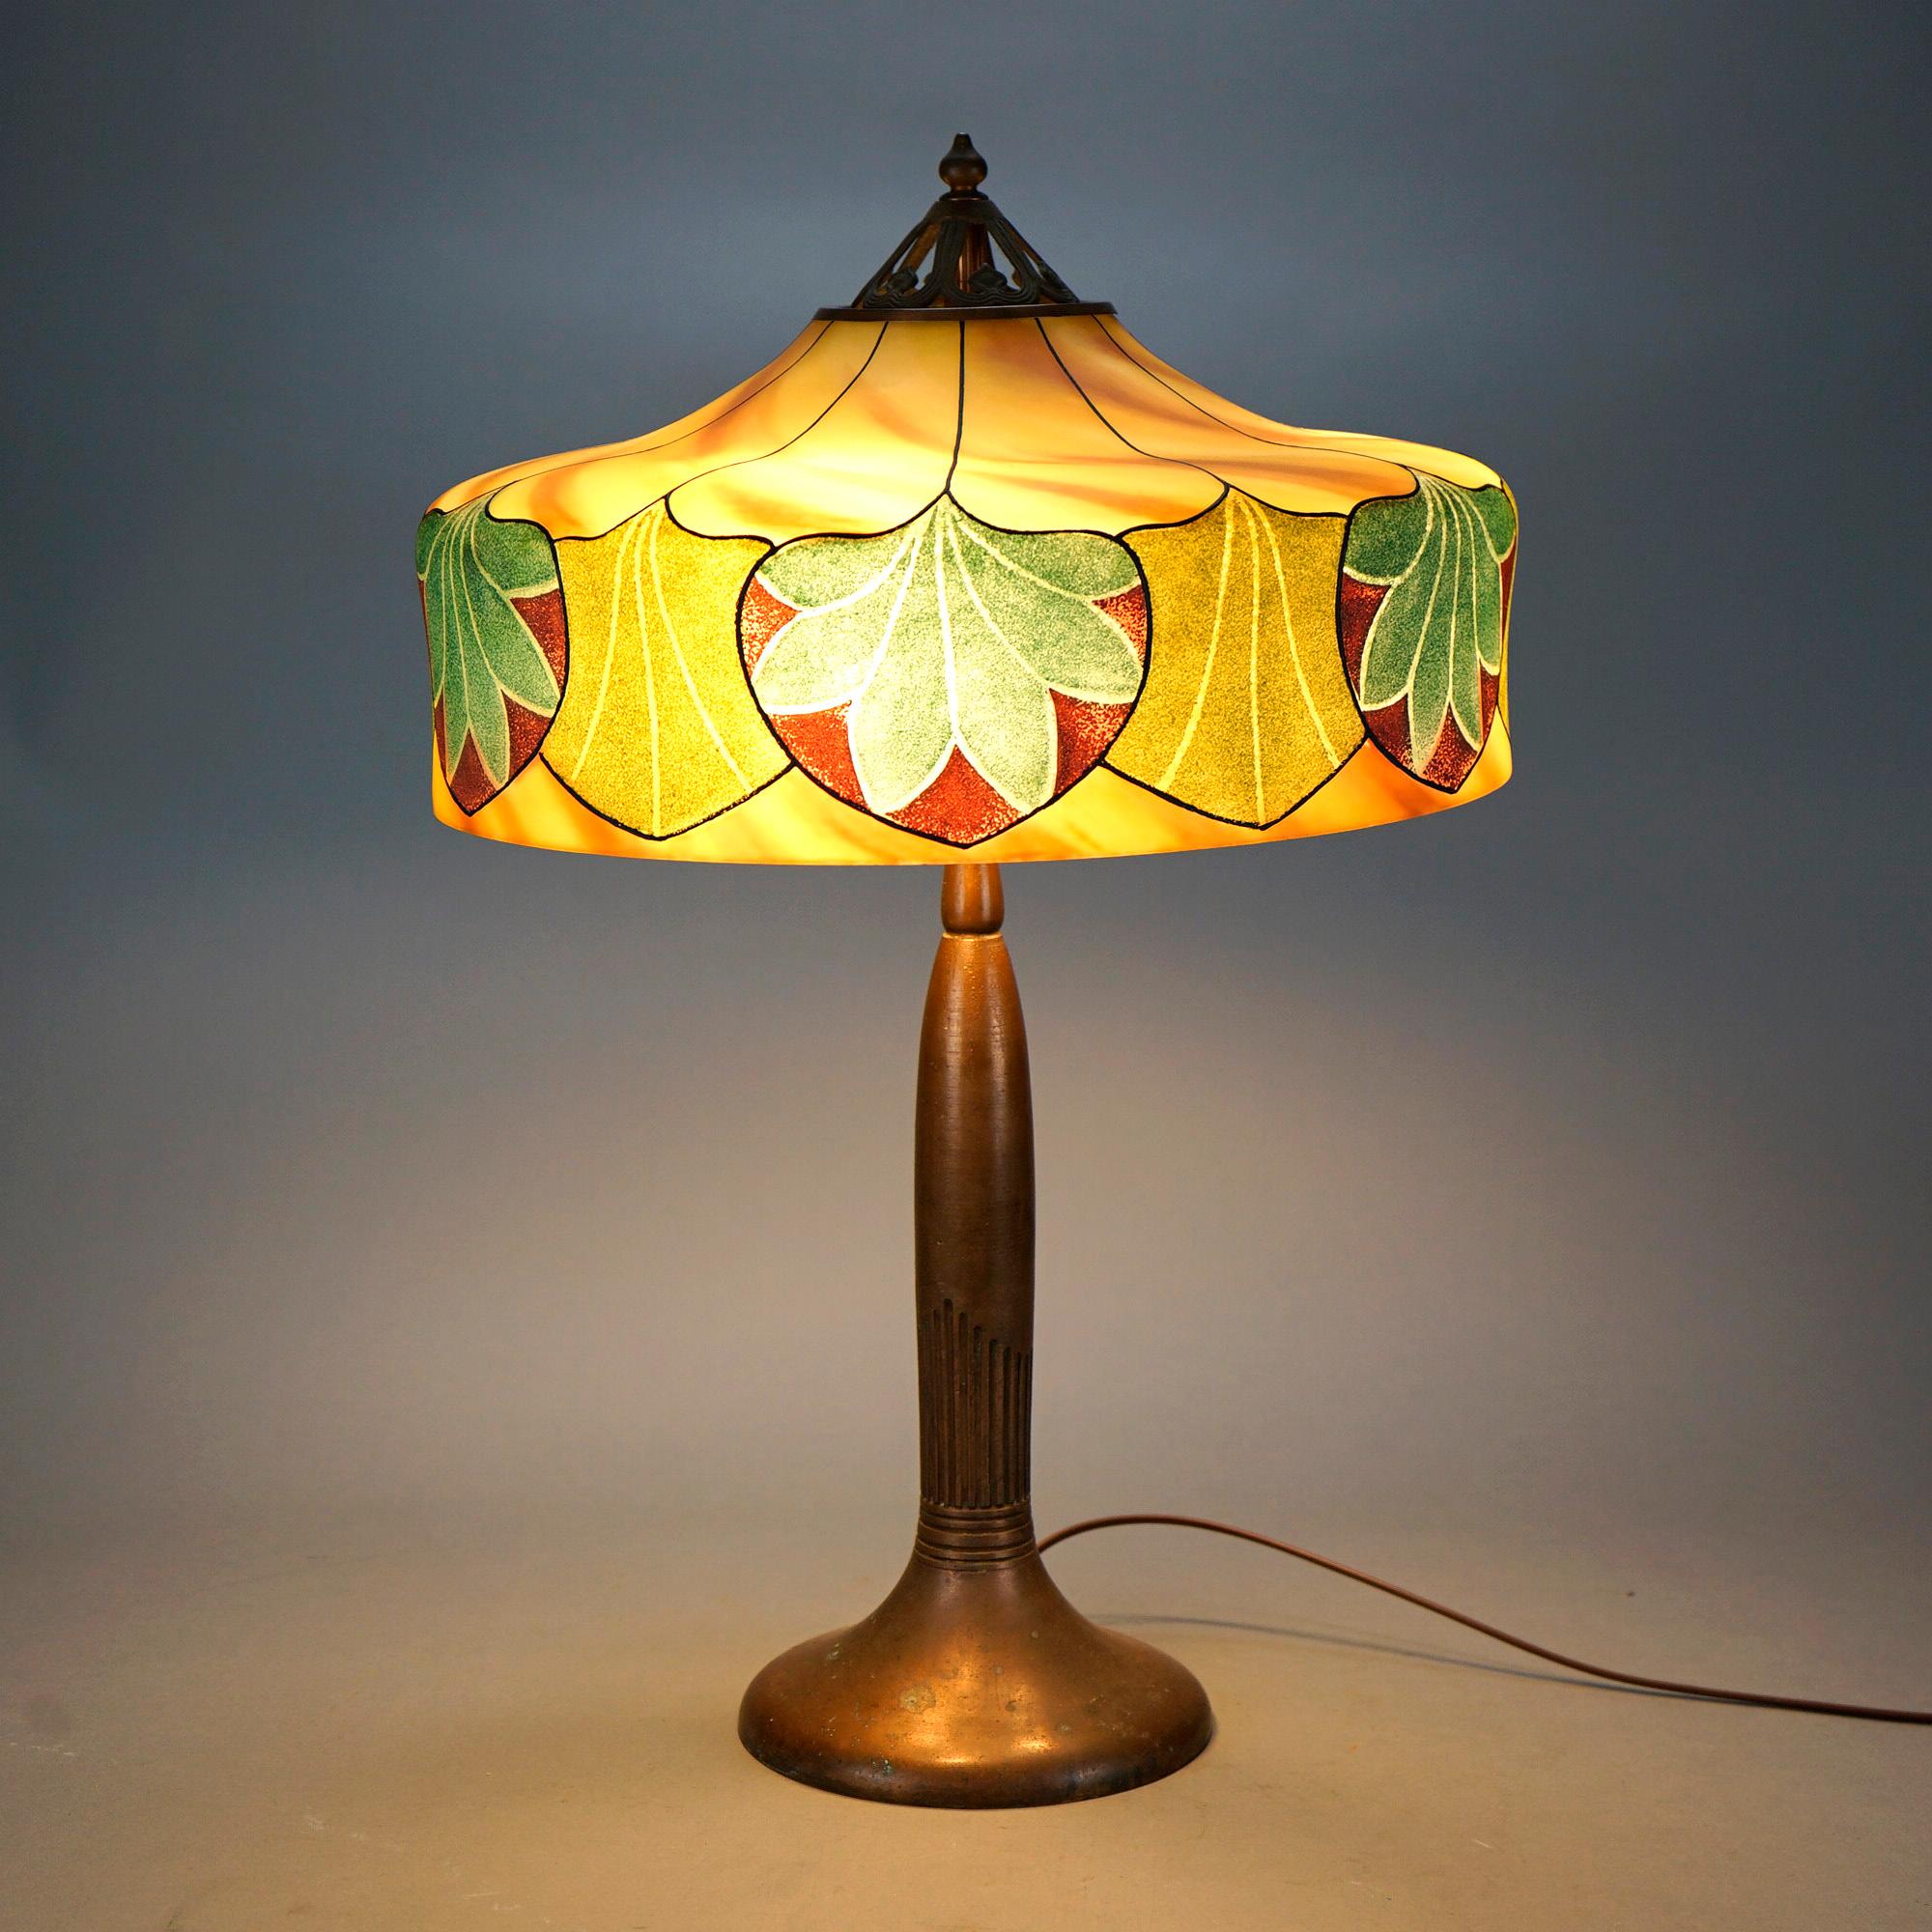 An antique Arts and Crafts table lamp by Handel offers obvers and reverse painted shade having repeating stylized foliate design over triple socket base, both elements signed Handel, shade No 5347, c1920.

Measures- 24.5''H x 16''W x